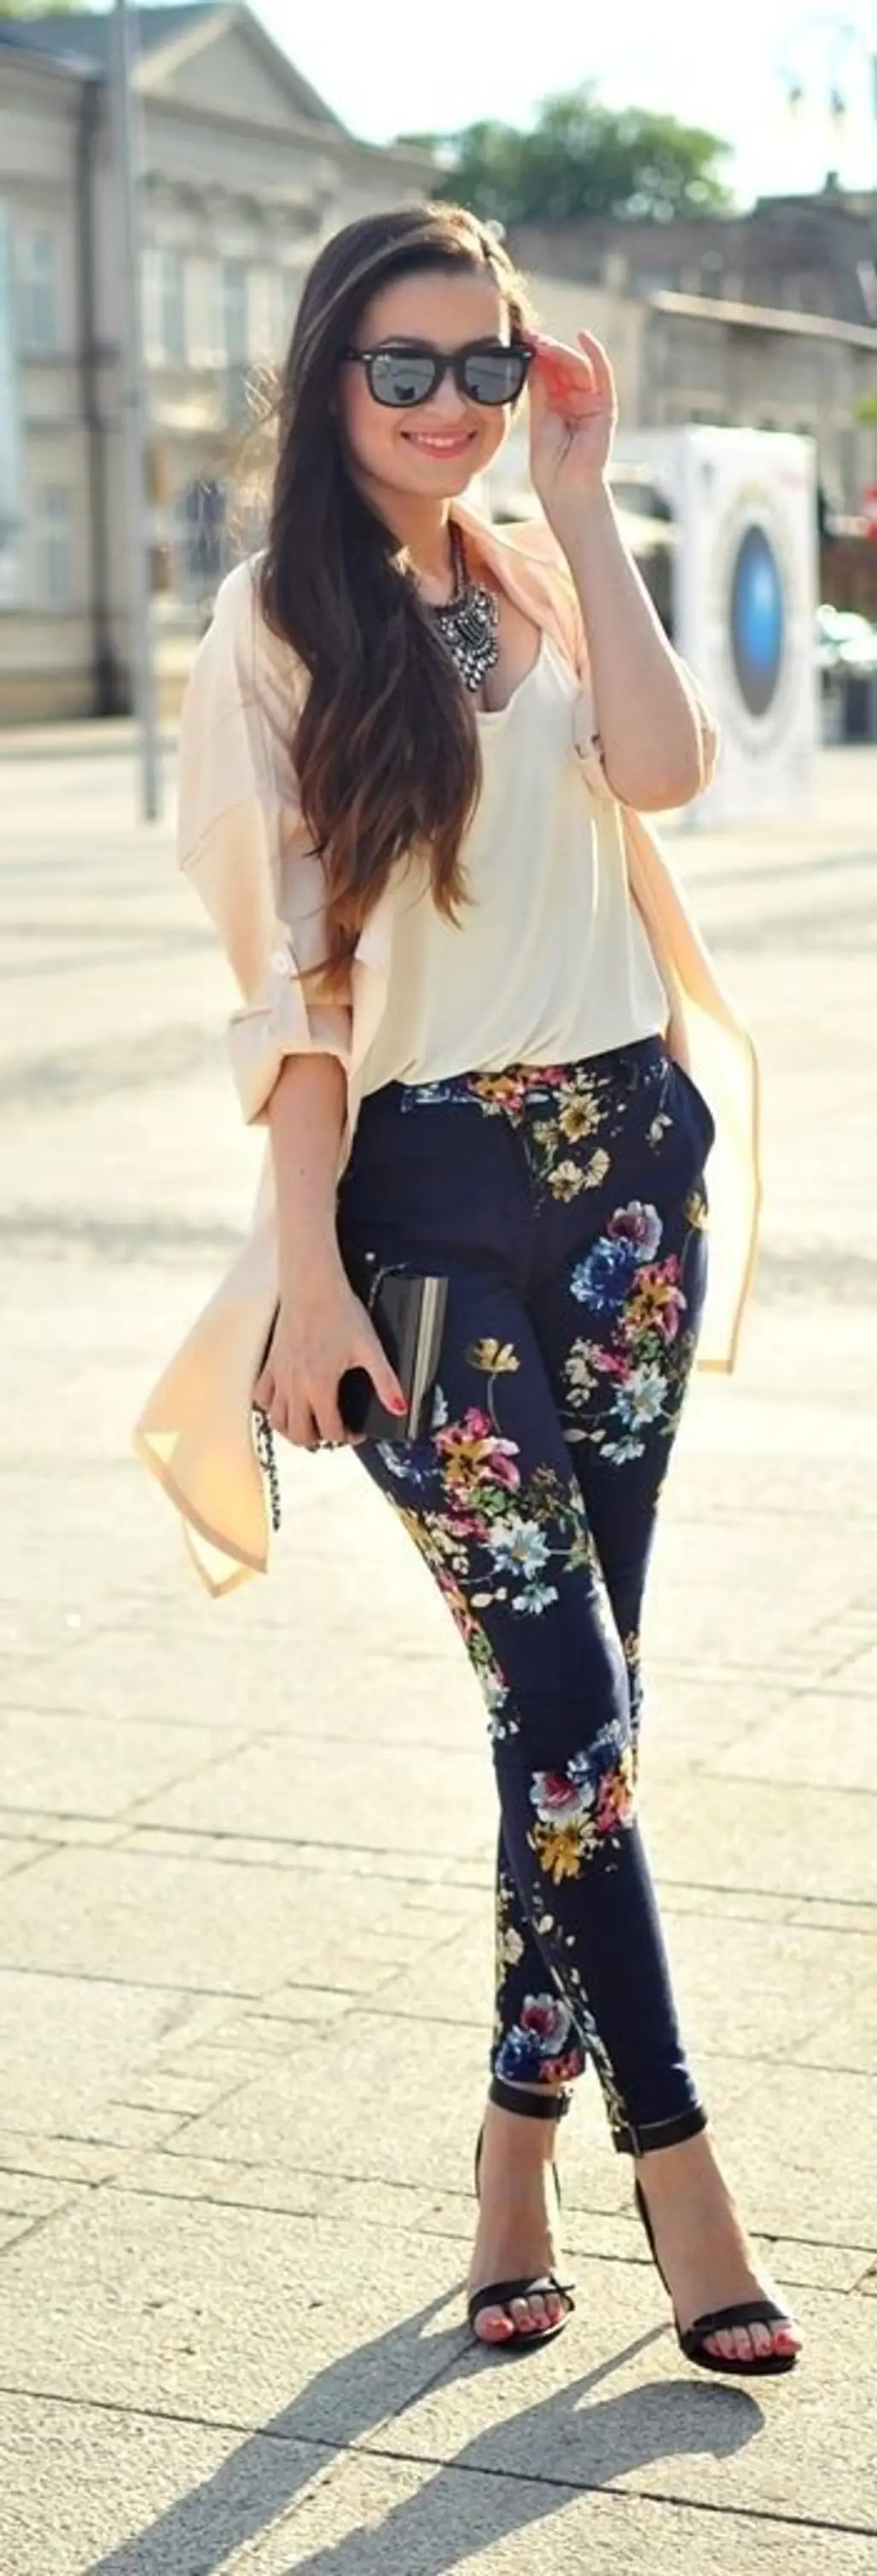 West Fashions - [ MODERN FEMININITY ] Floral trend in... | Facebook